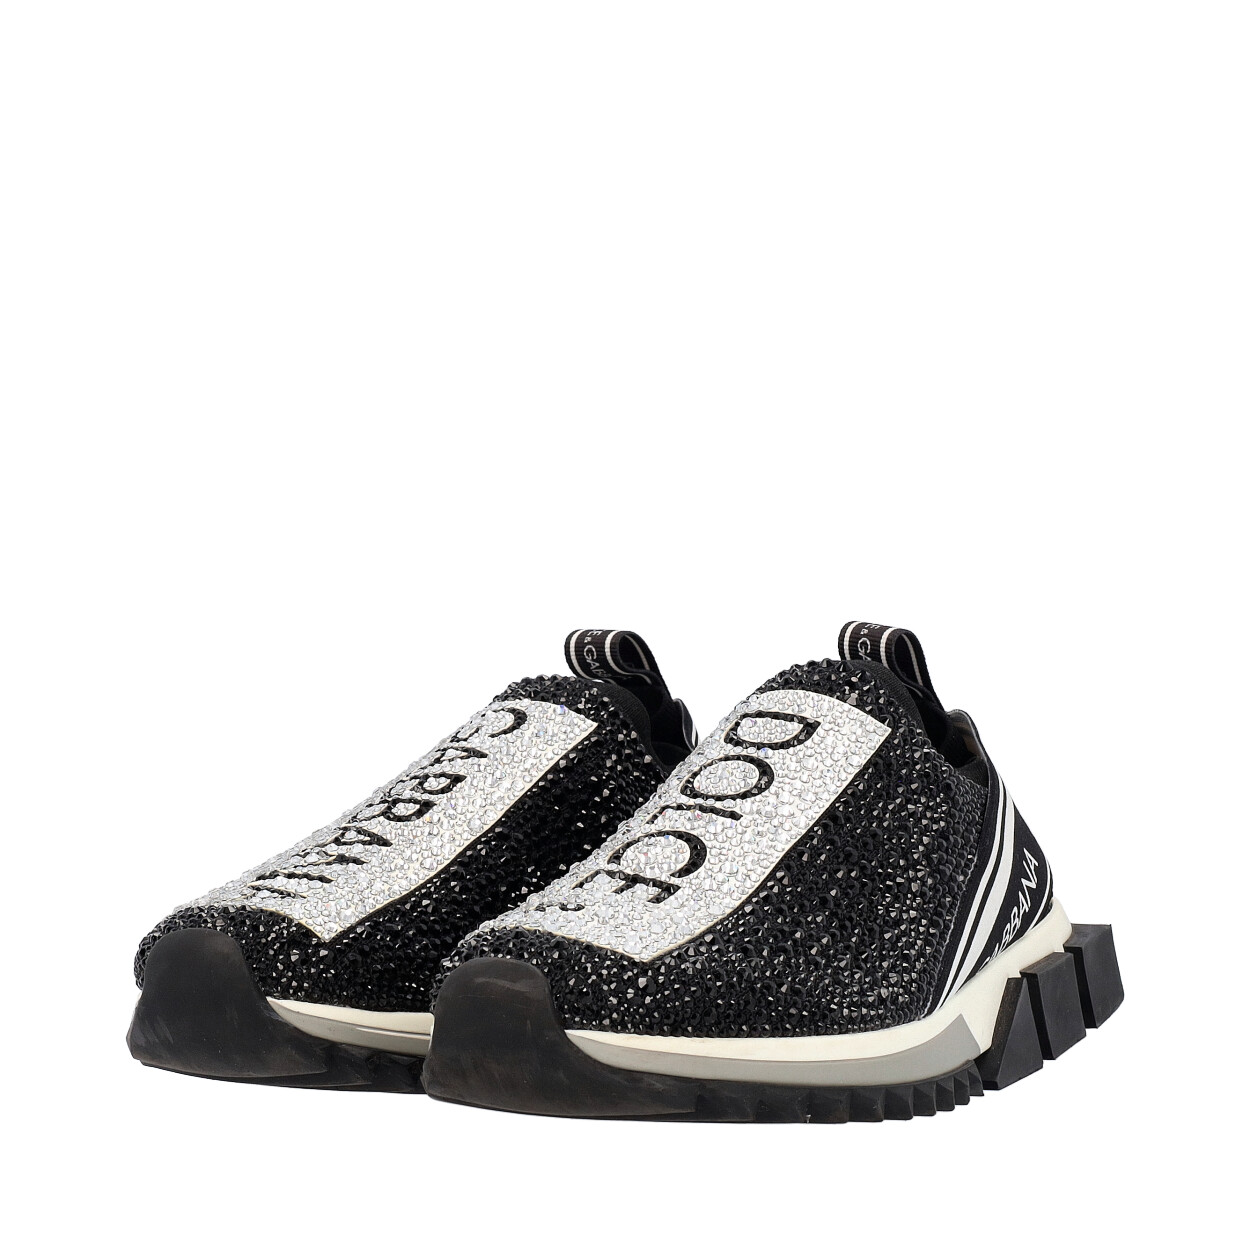 DOLCE & GABBANA Knit Crystal Embellished Sorento Sneakers Black | Luxity